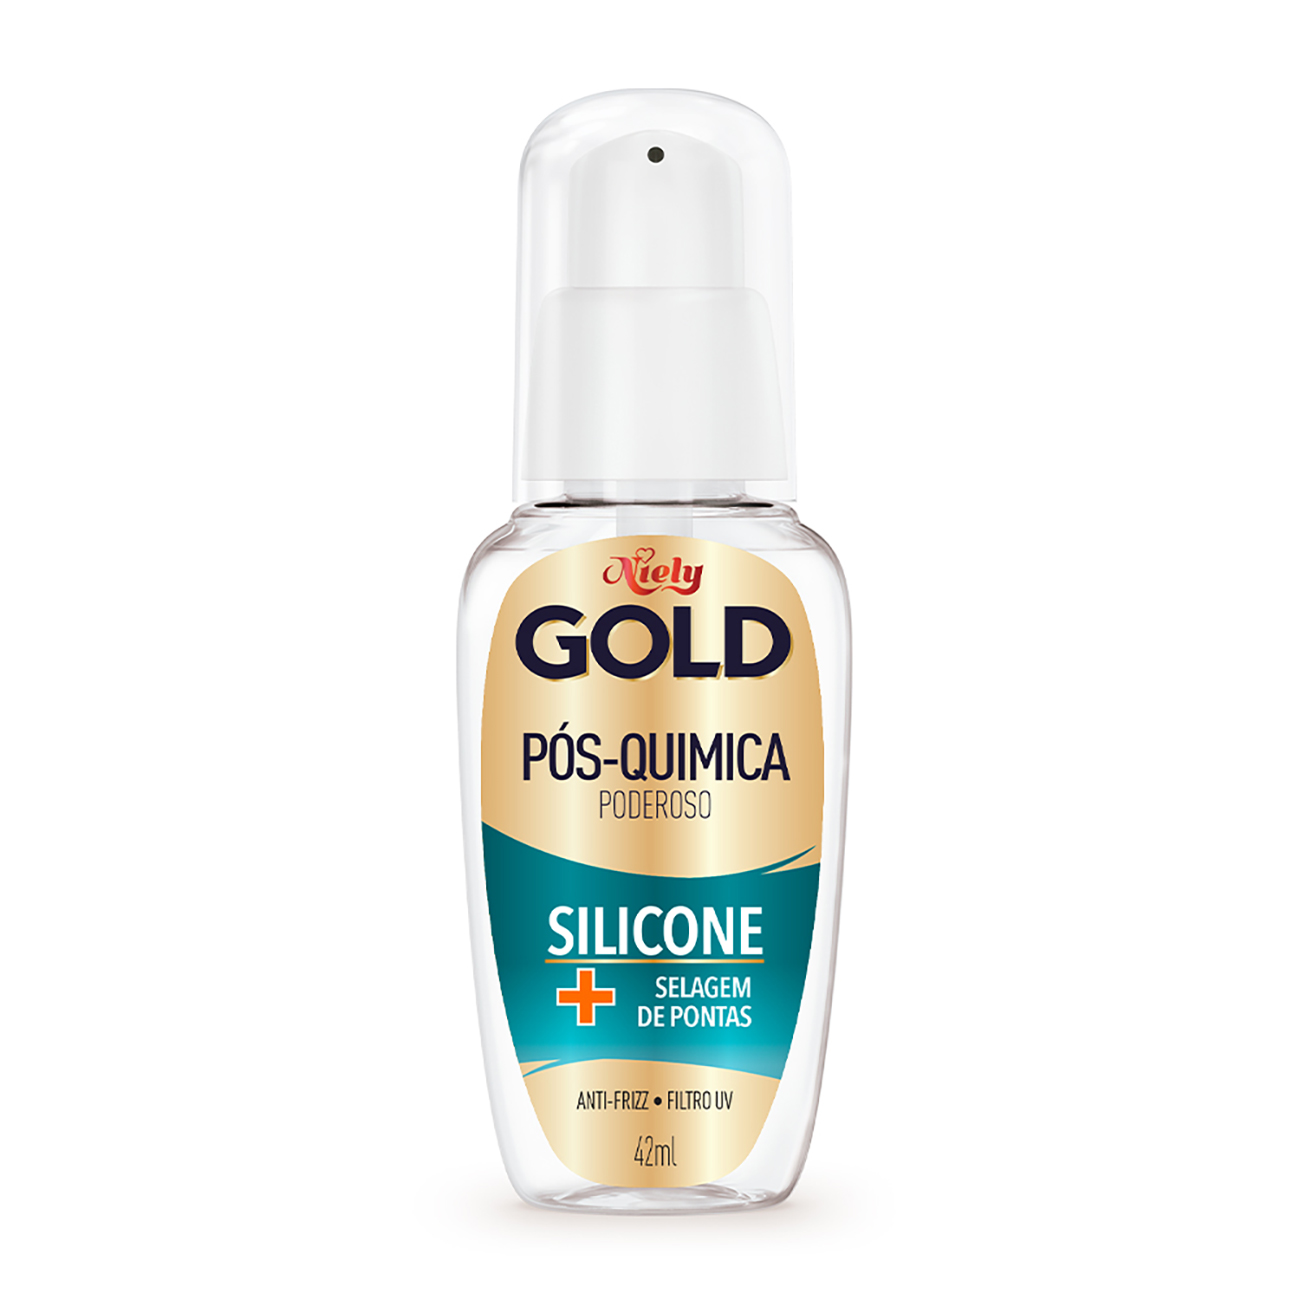 Silicone Niely Gold Ps Quimica Poderoso 42mL